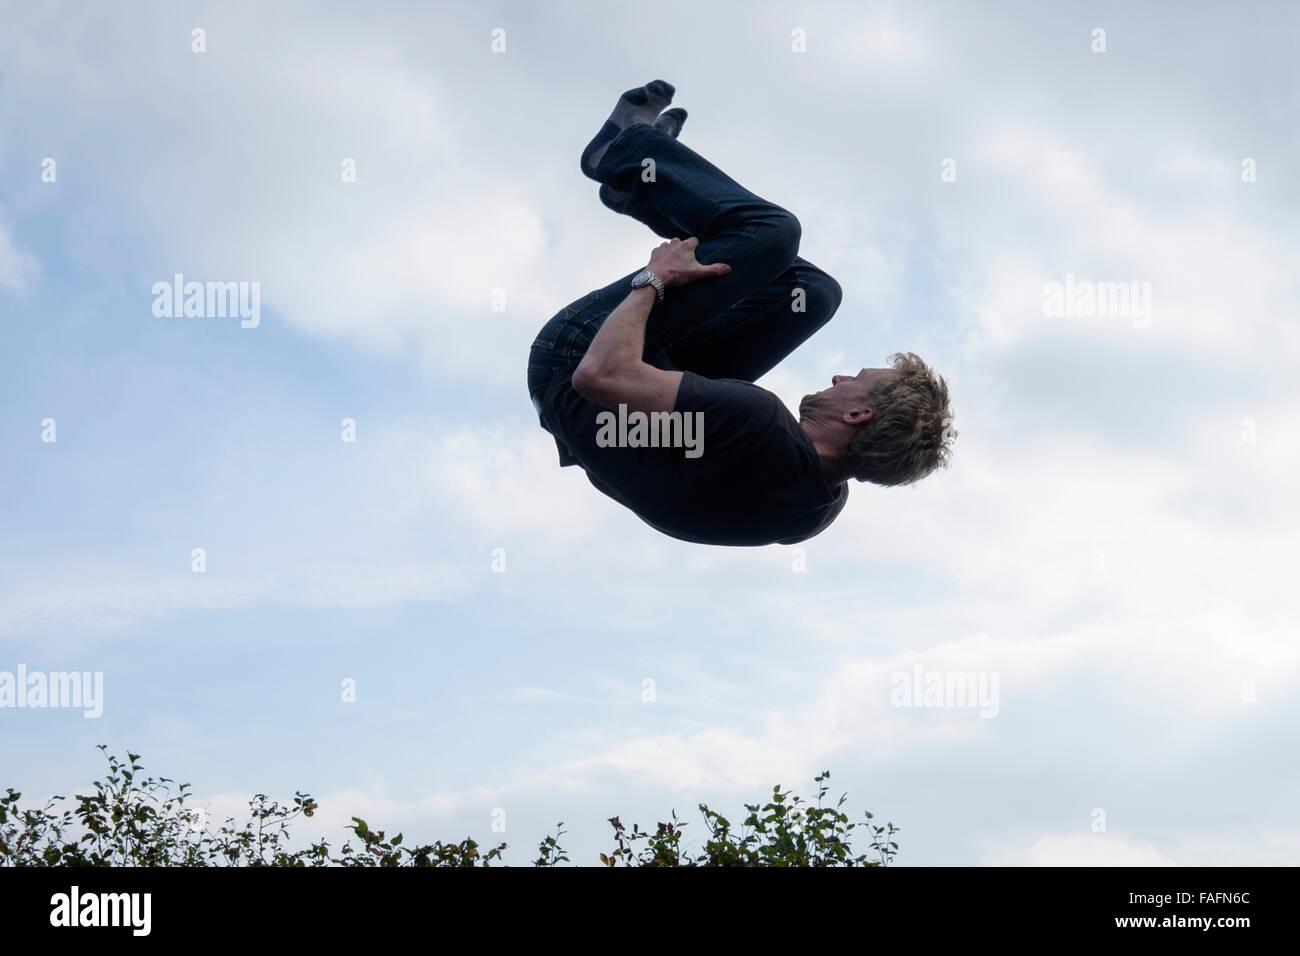 Man doing a somersault in mid air above trees against the sky. England, UK, Britain Stock Photo